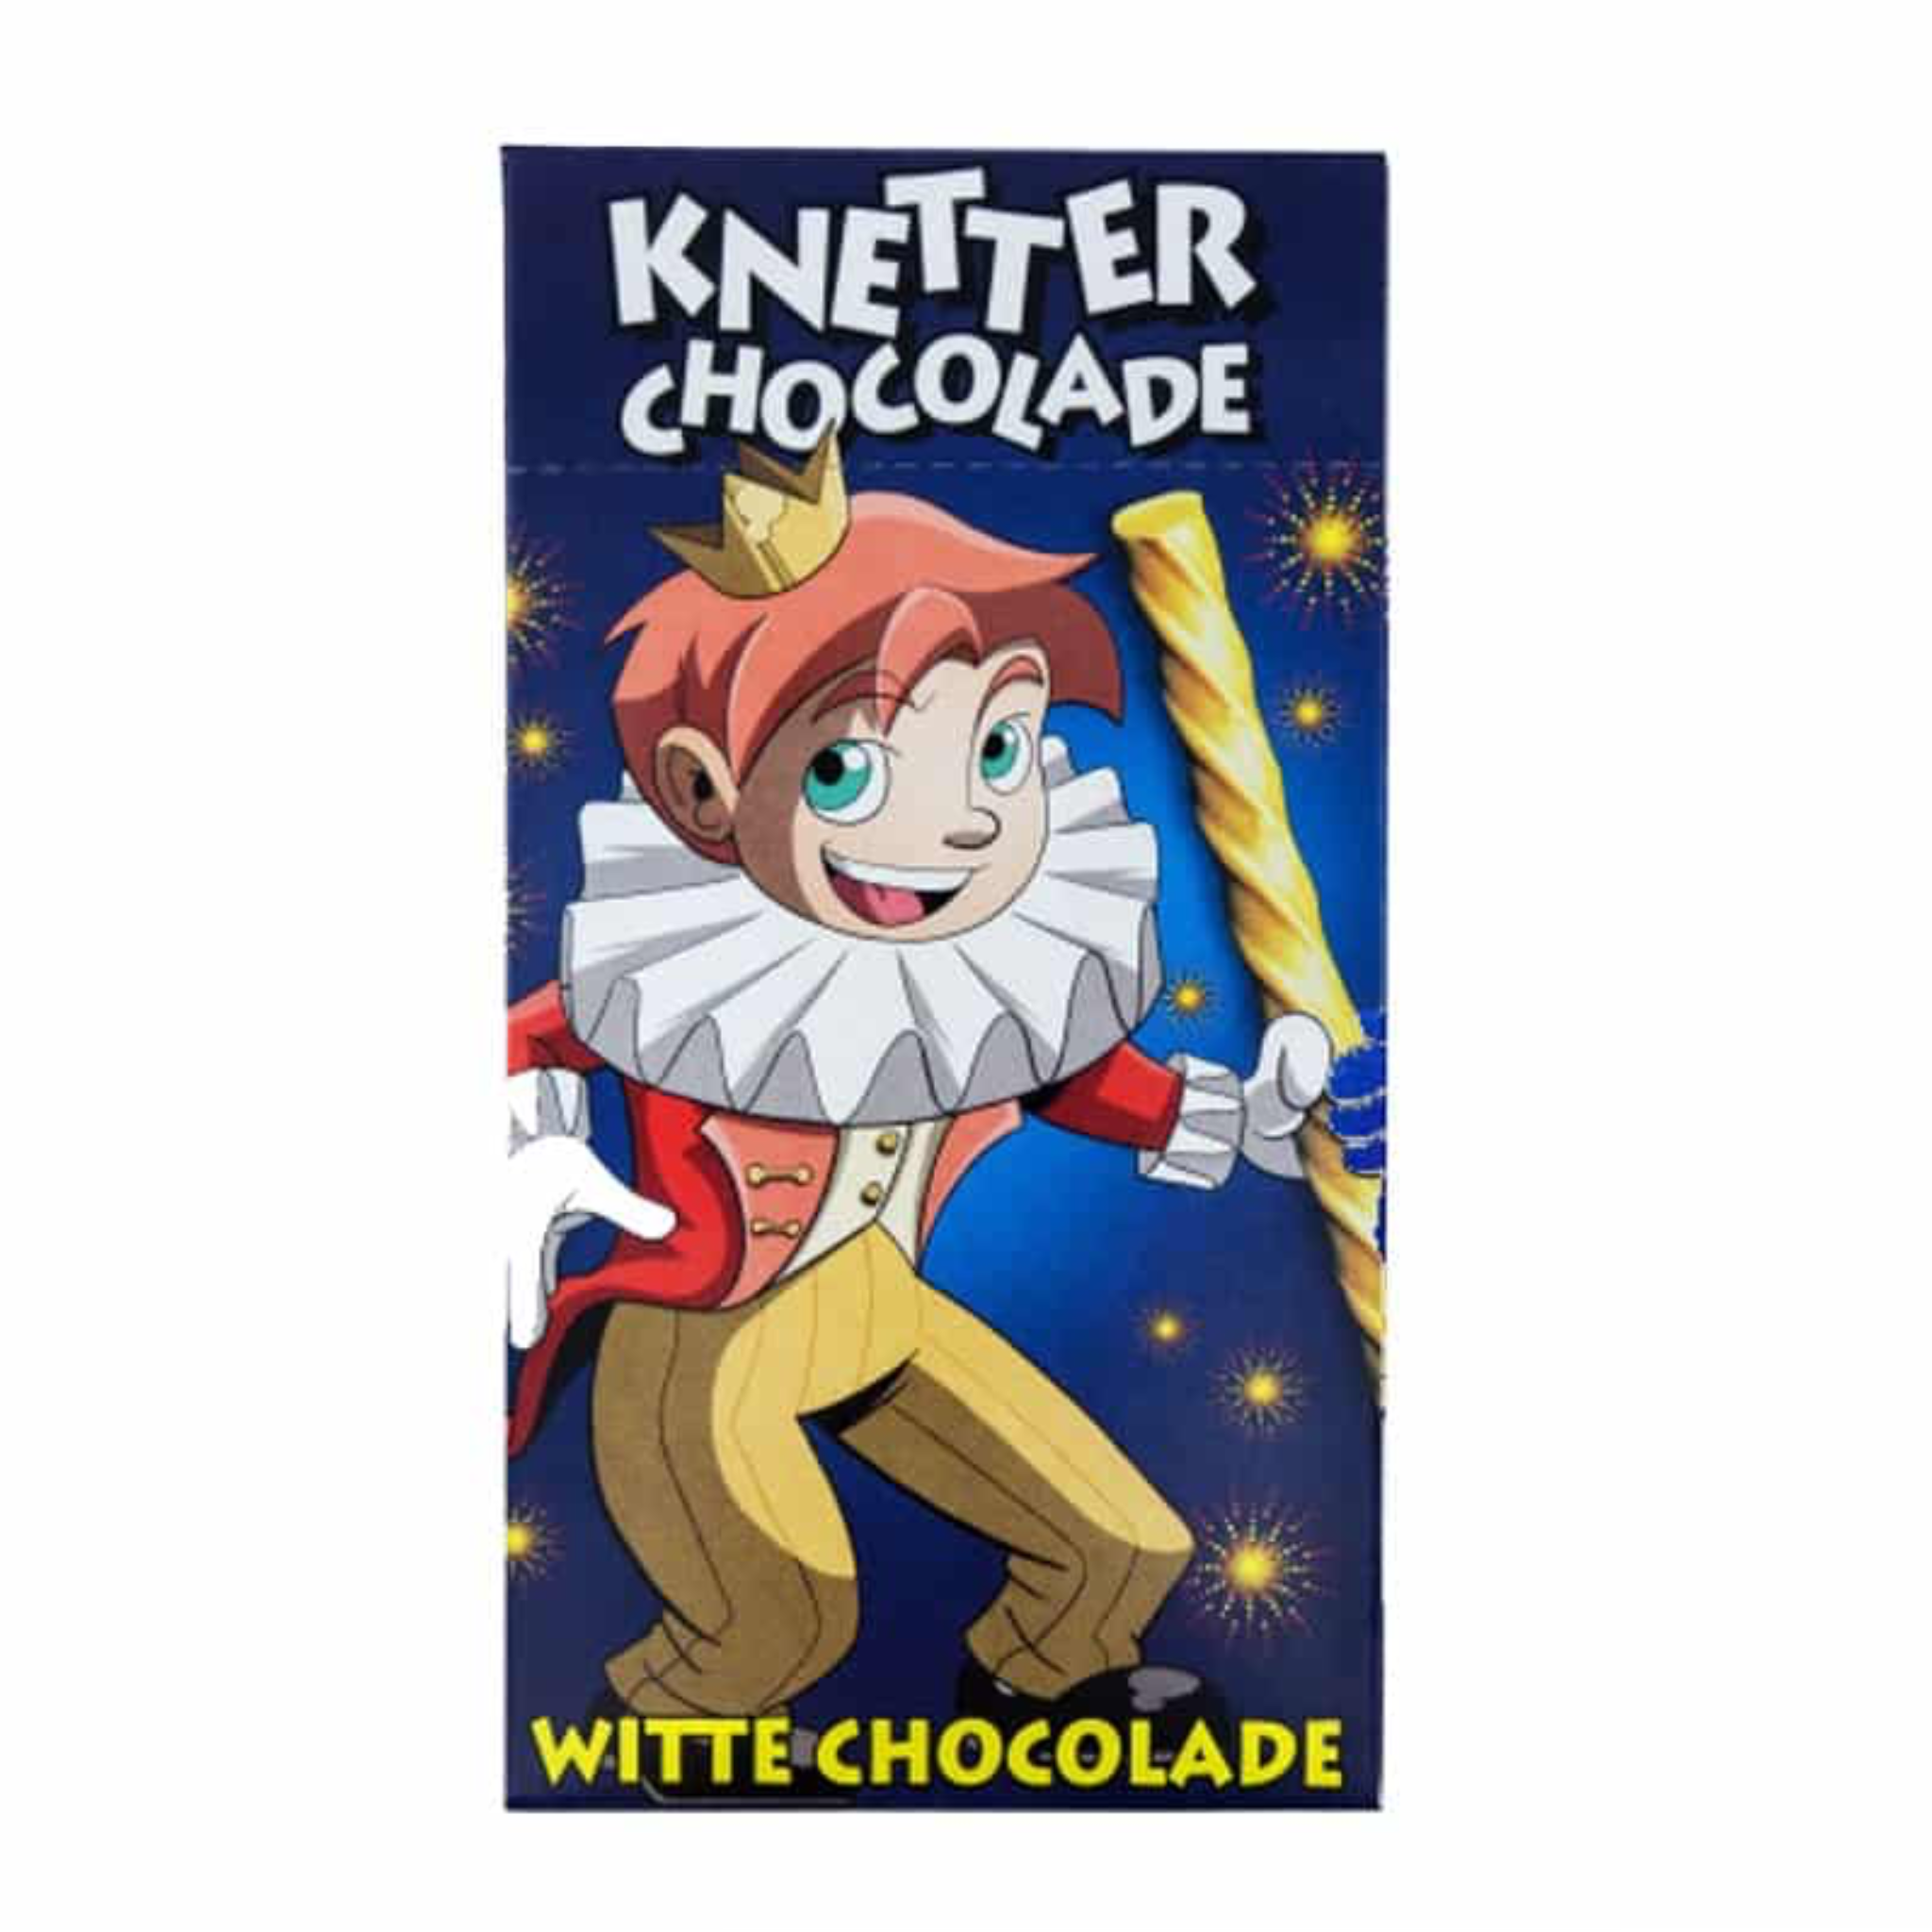 Knetter witte chocolade